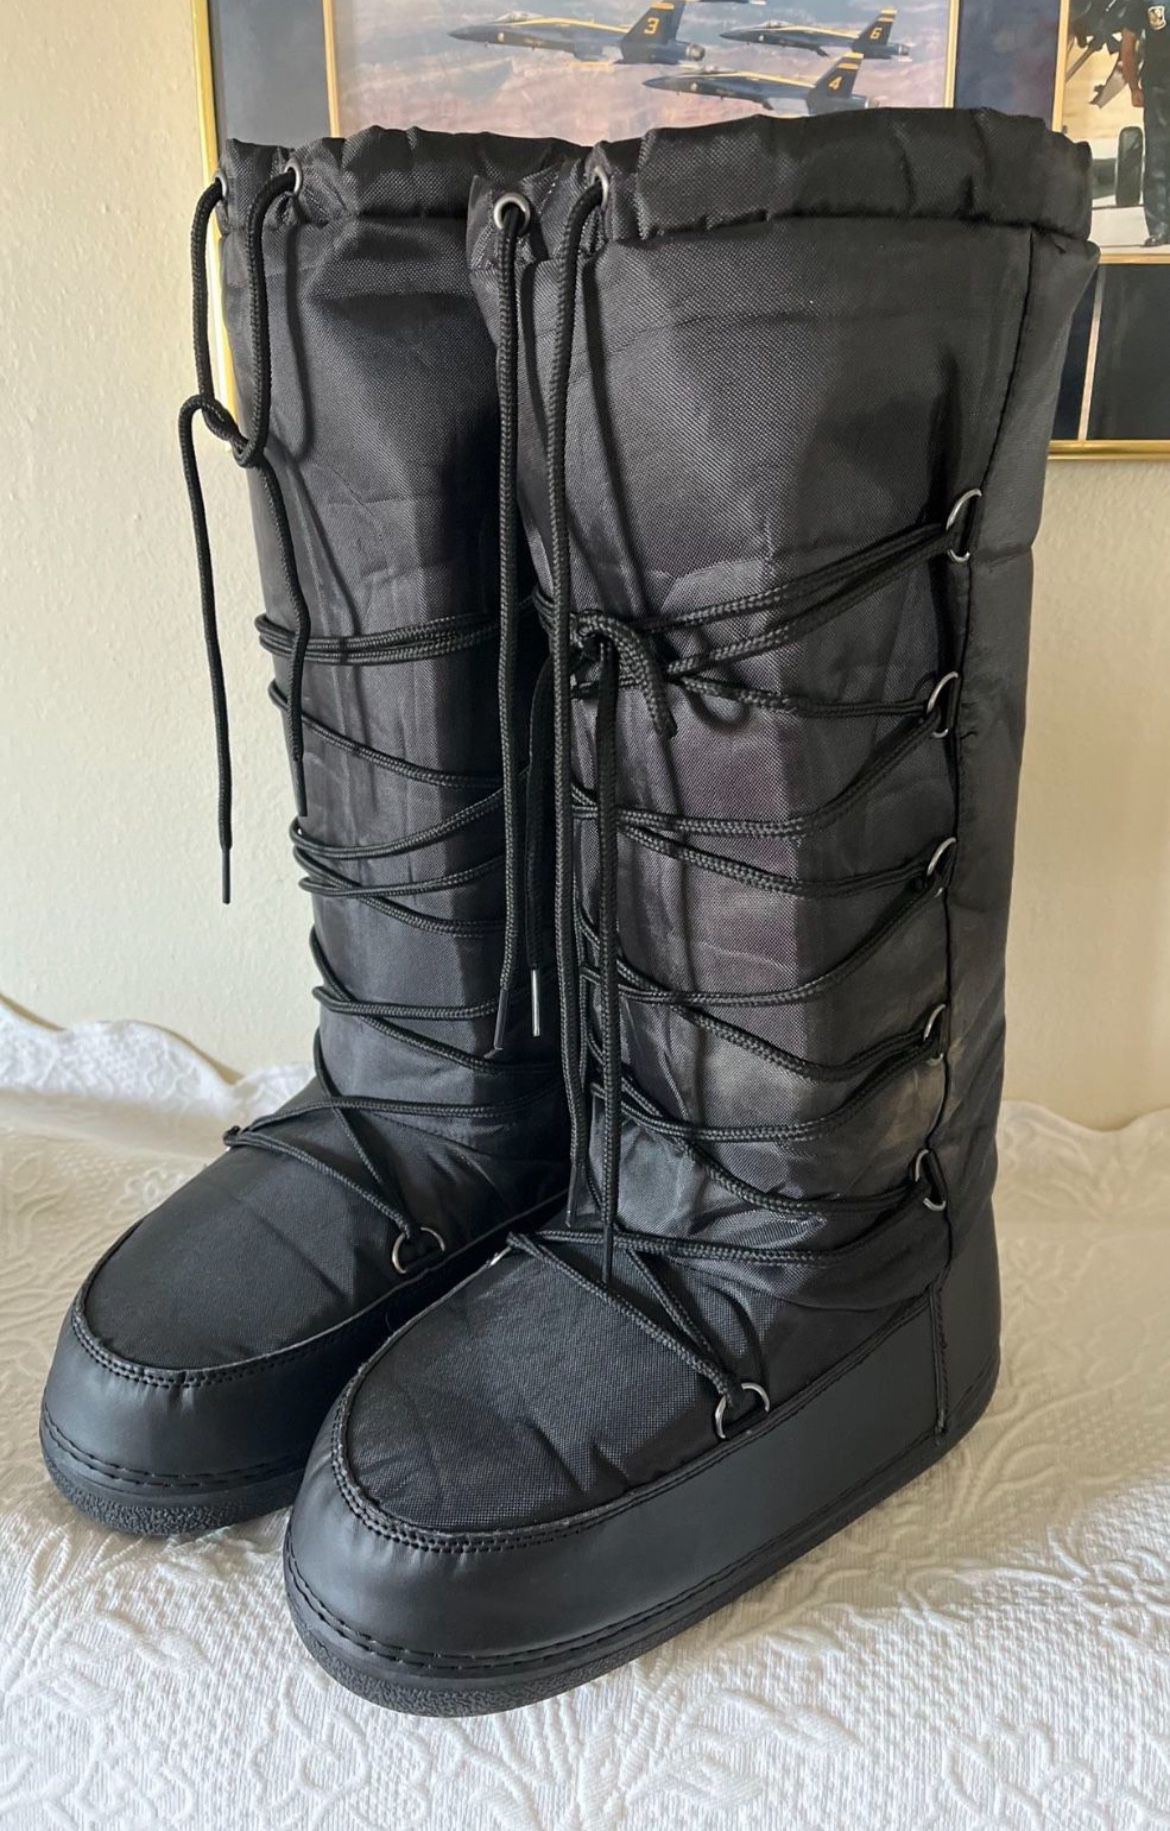 Truffell Collection High Leg Snow Boots, Black, Flexable Front Cross Lace. Size S